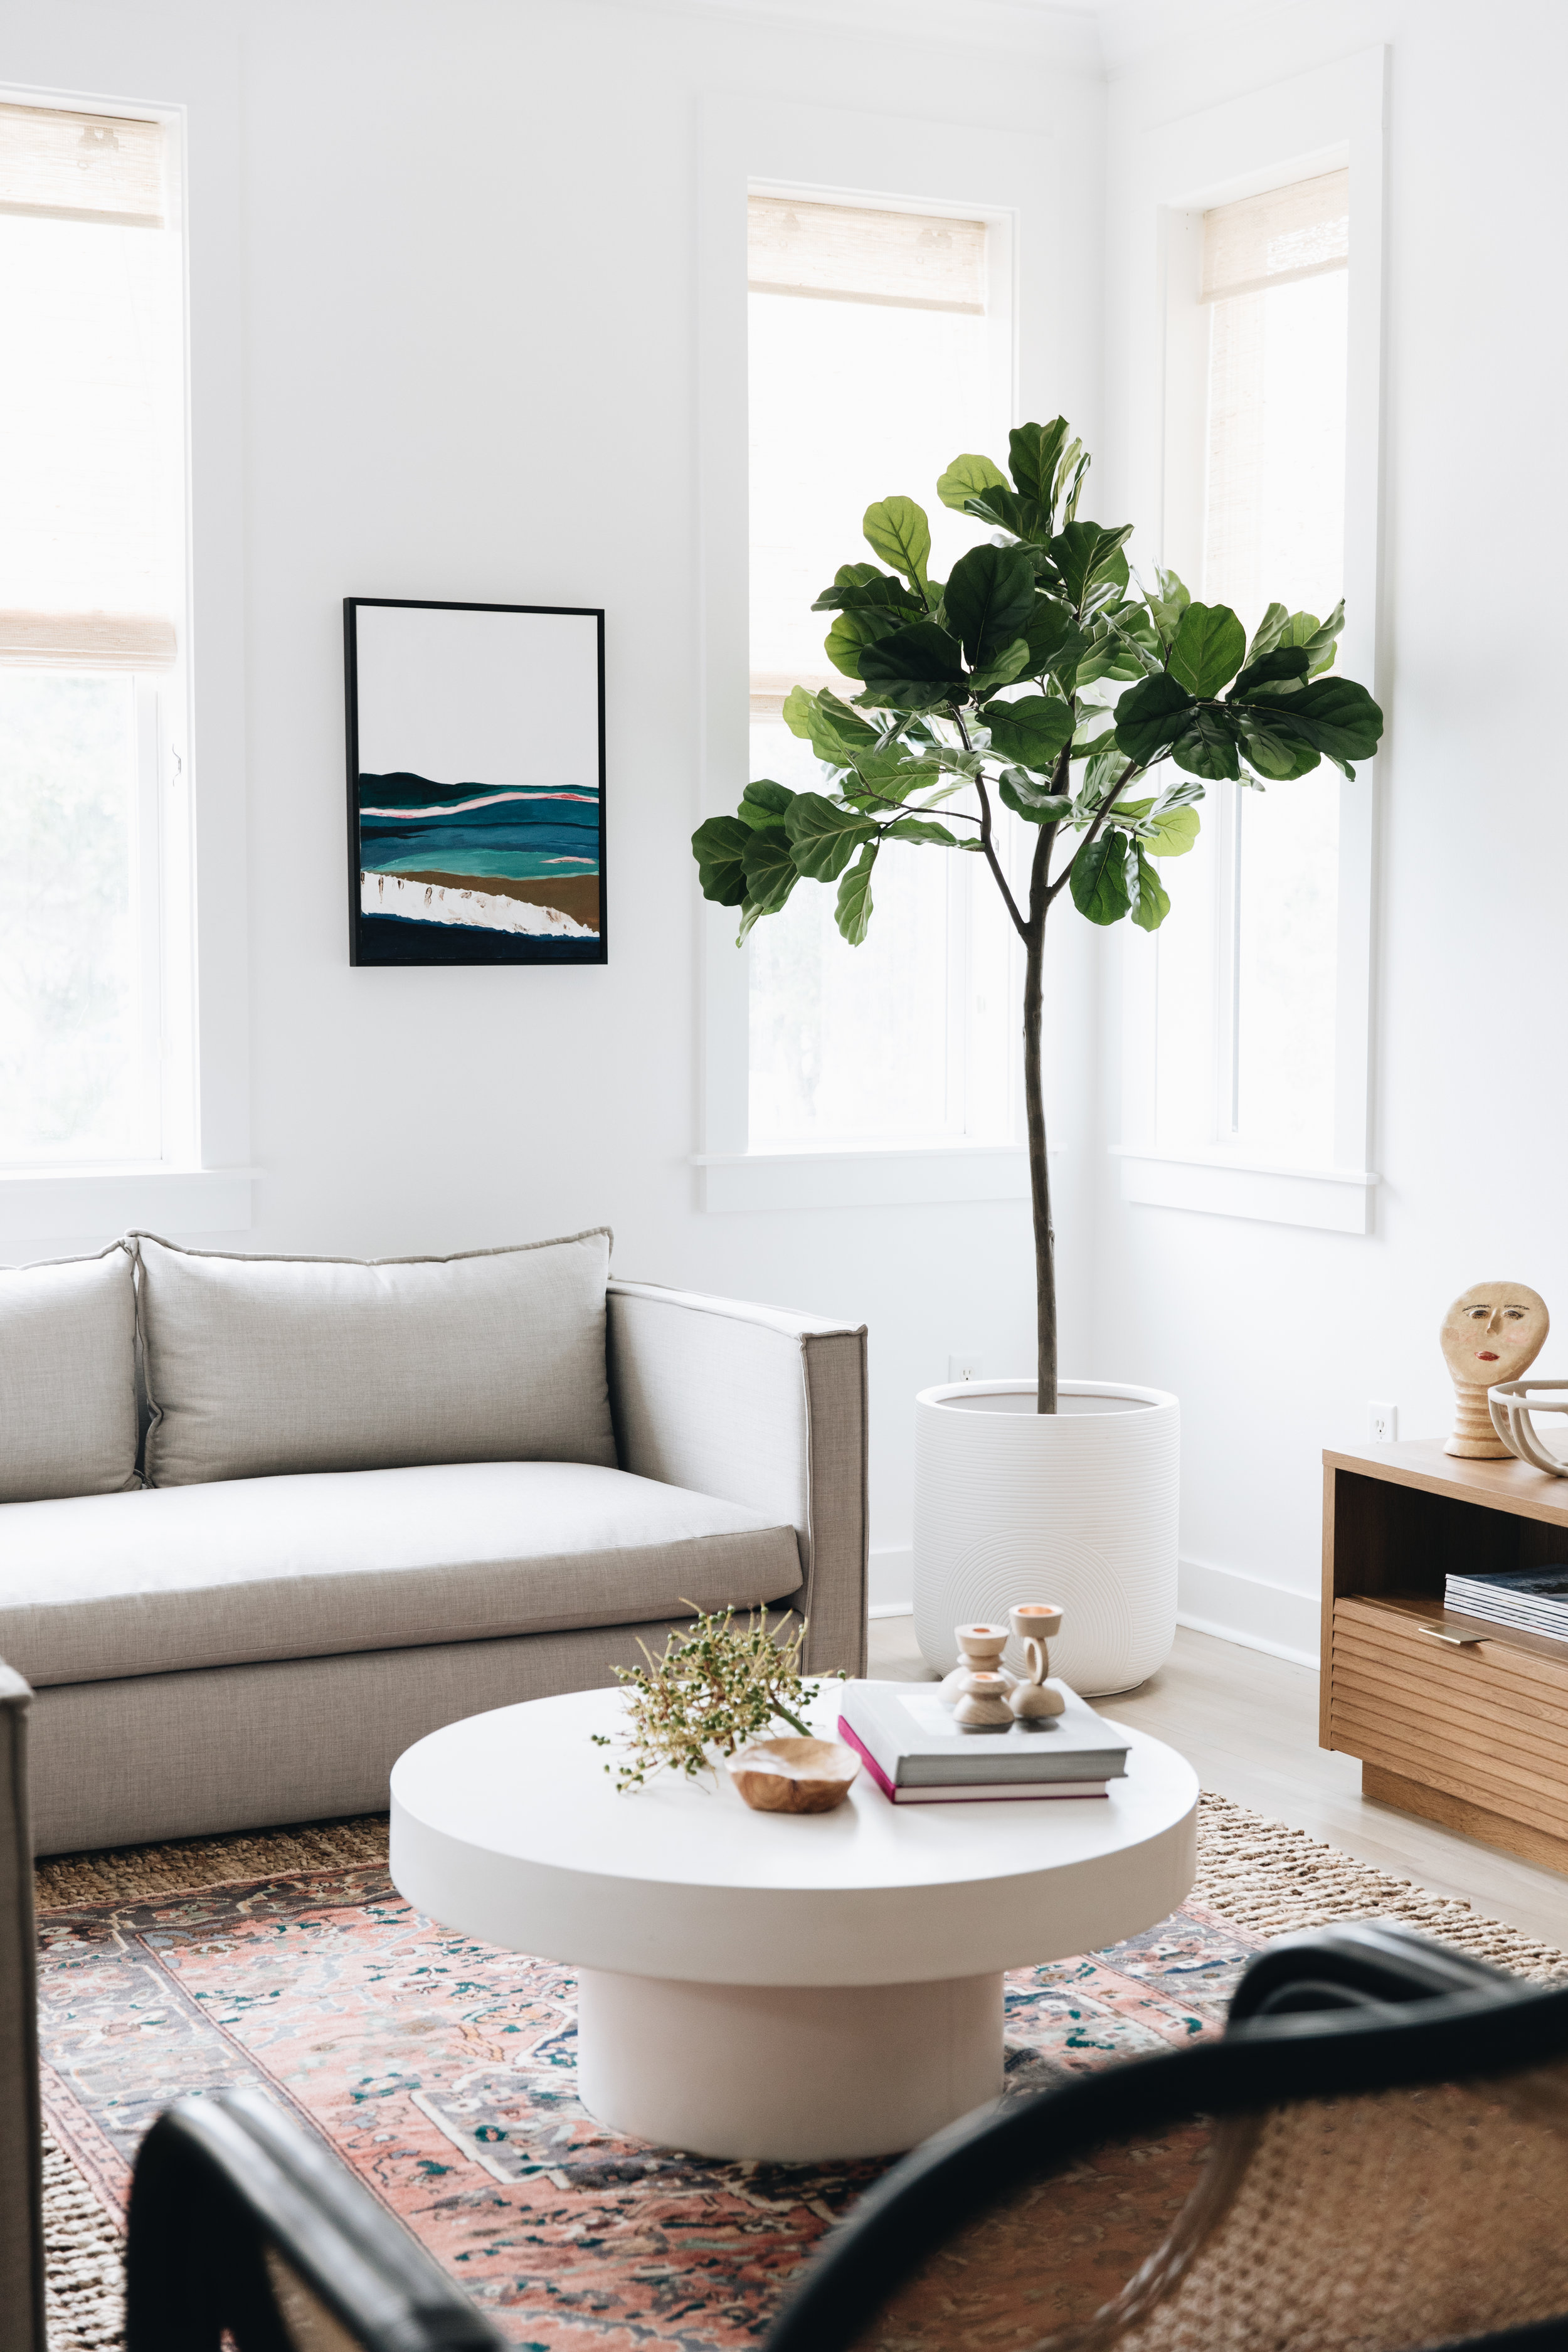   Sofa (custom from Clad Home)    Faux Fiddle Leaf    Coffee Table (Sold Out, Similar)    Wood Bowl    Planter    